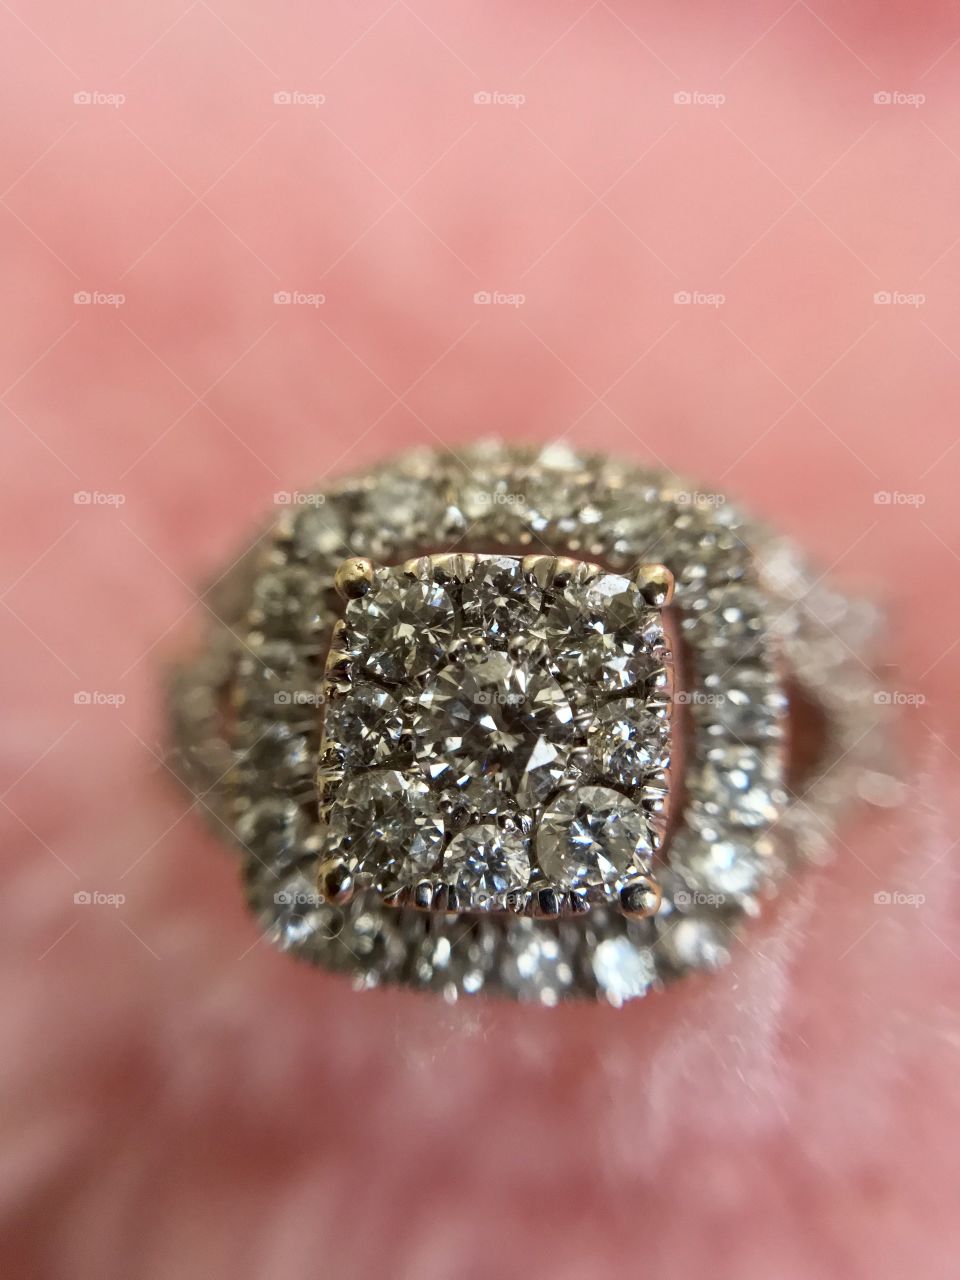 Diamond engagement ring on pink fluffy background